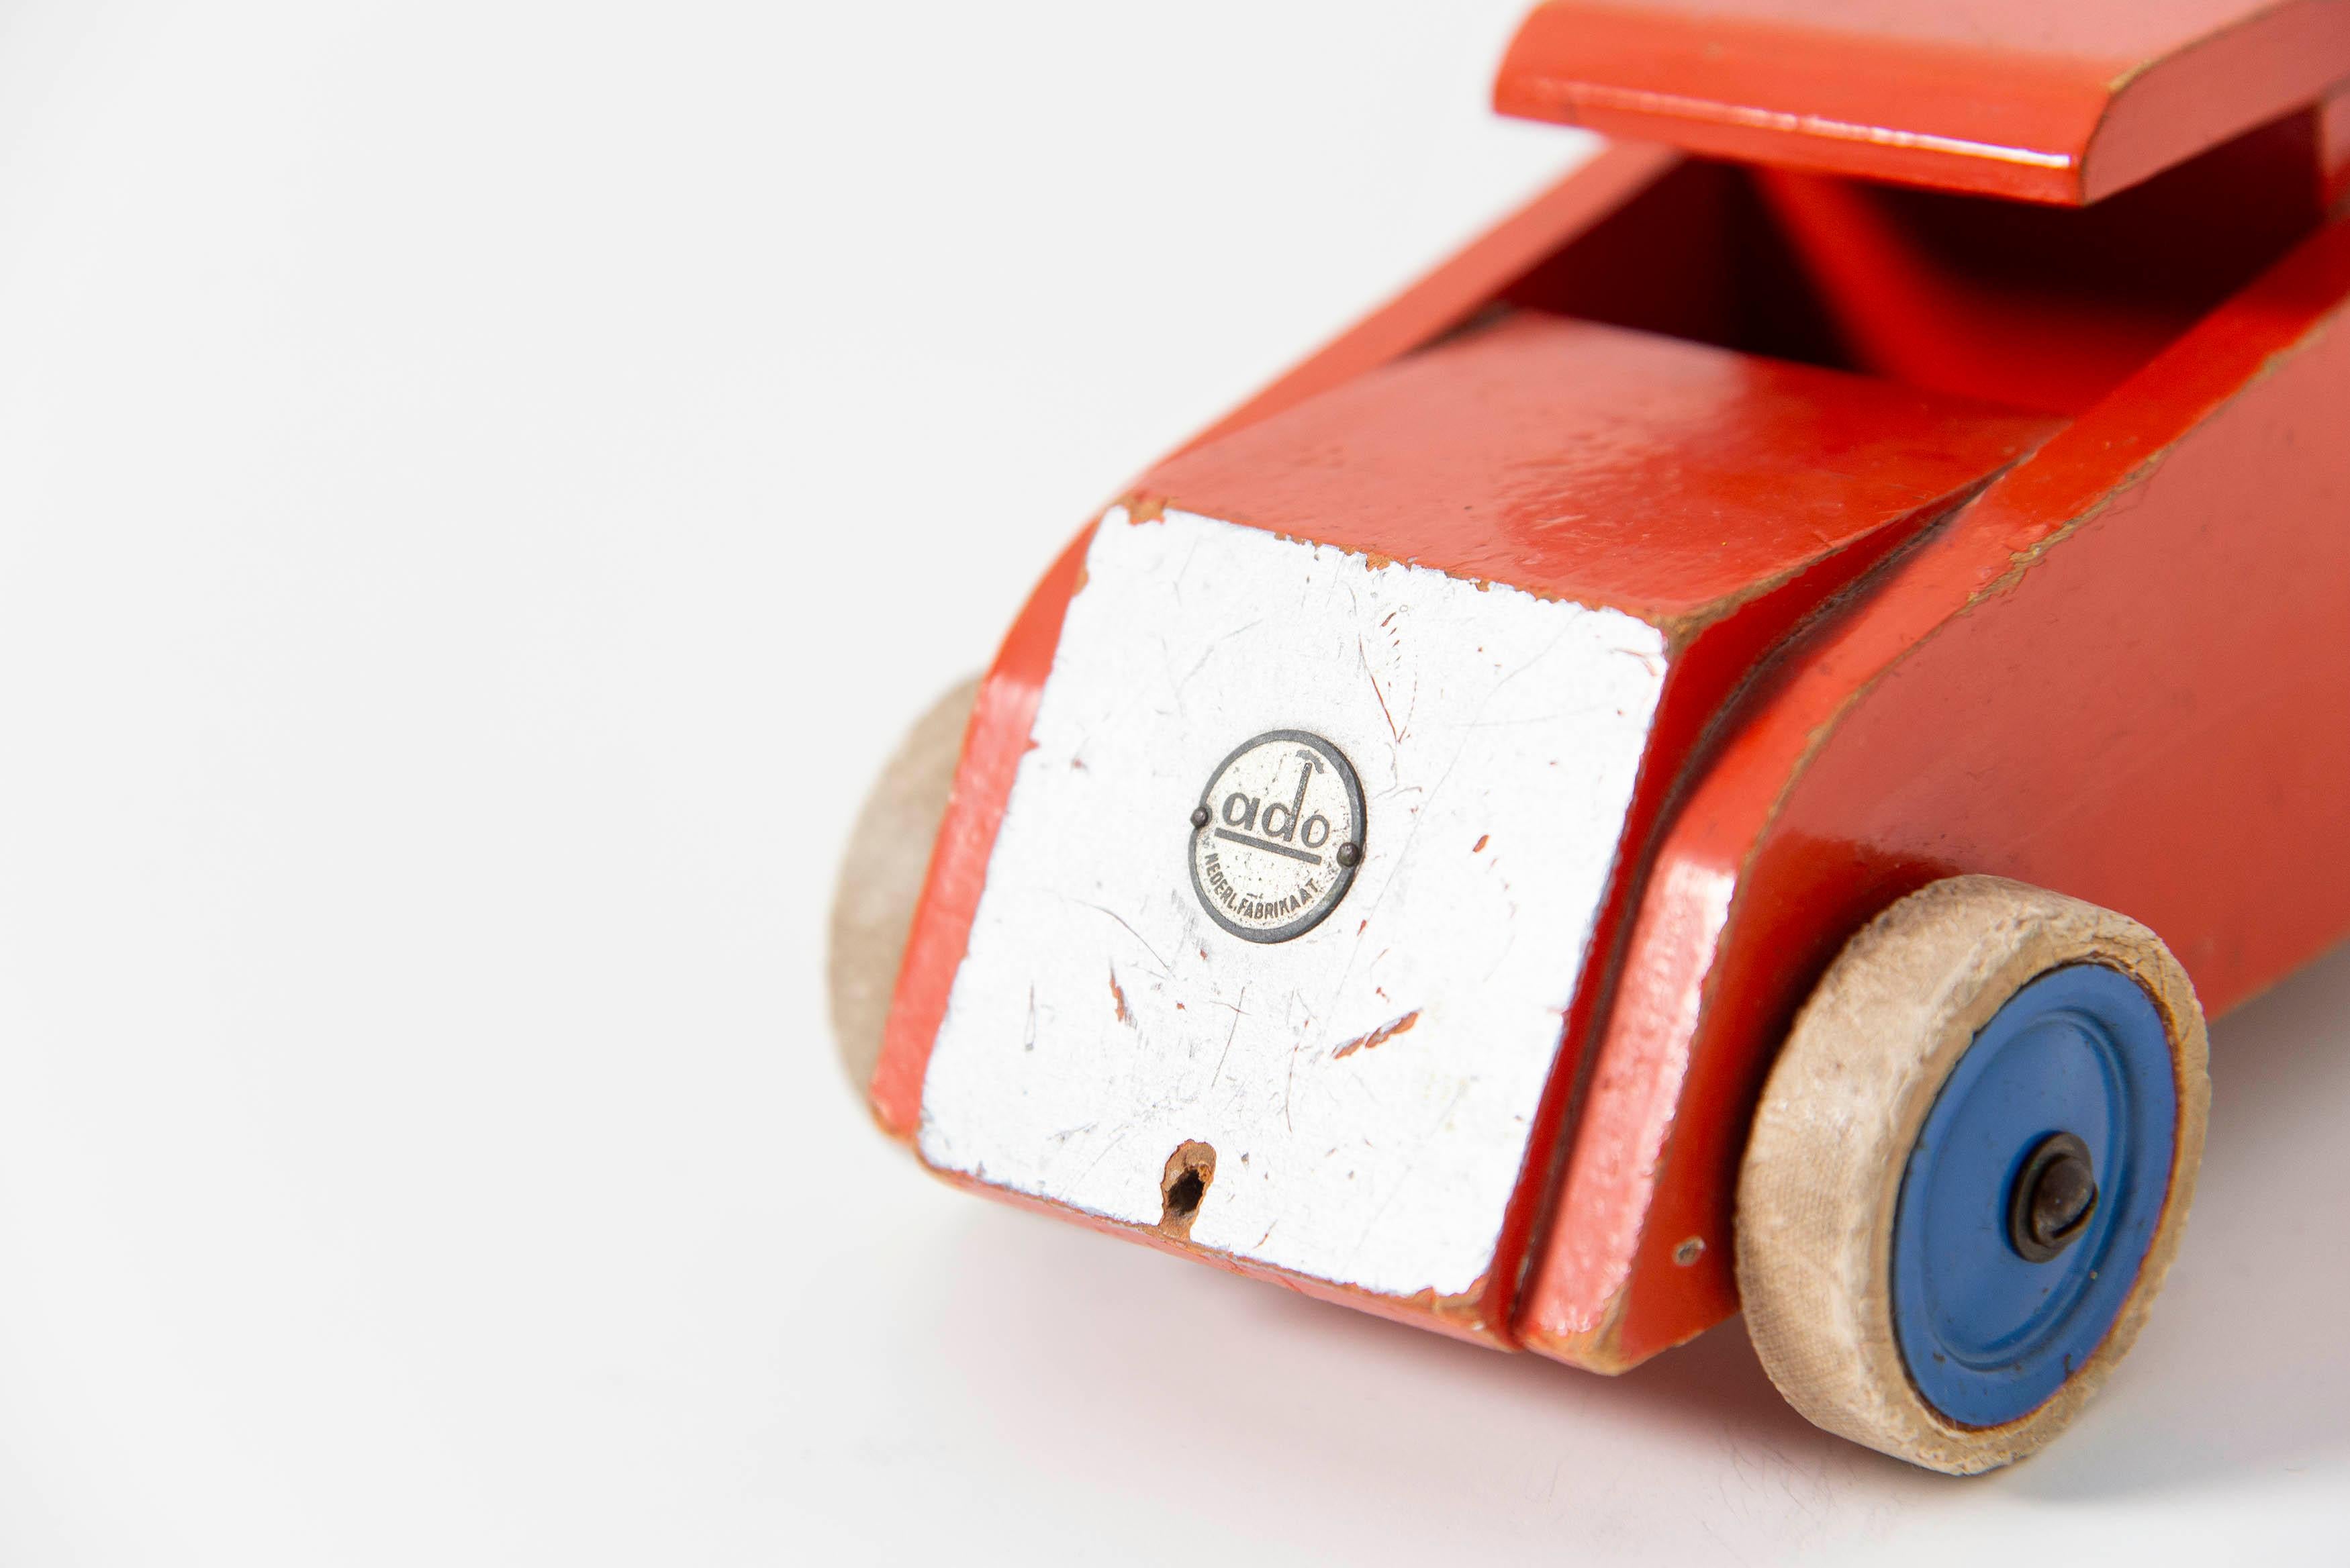 Rare collectible toy small toy truck designed by Ko Verzuu for Ado Holland in 1950. Ado means Arbeid door onvolwaardigen, translated; labor by incapacitated, which makes this an even more special piece. Toys by Ado are being highly collected at the